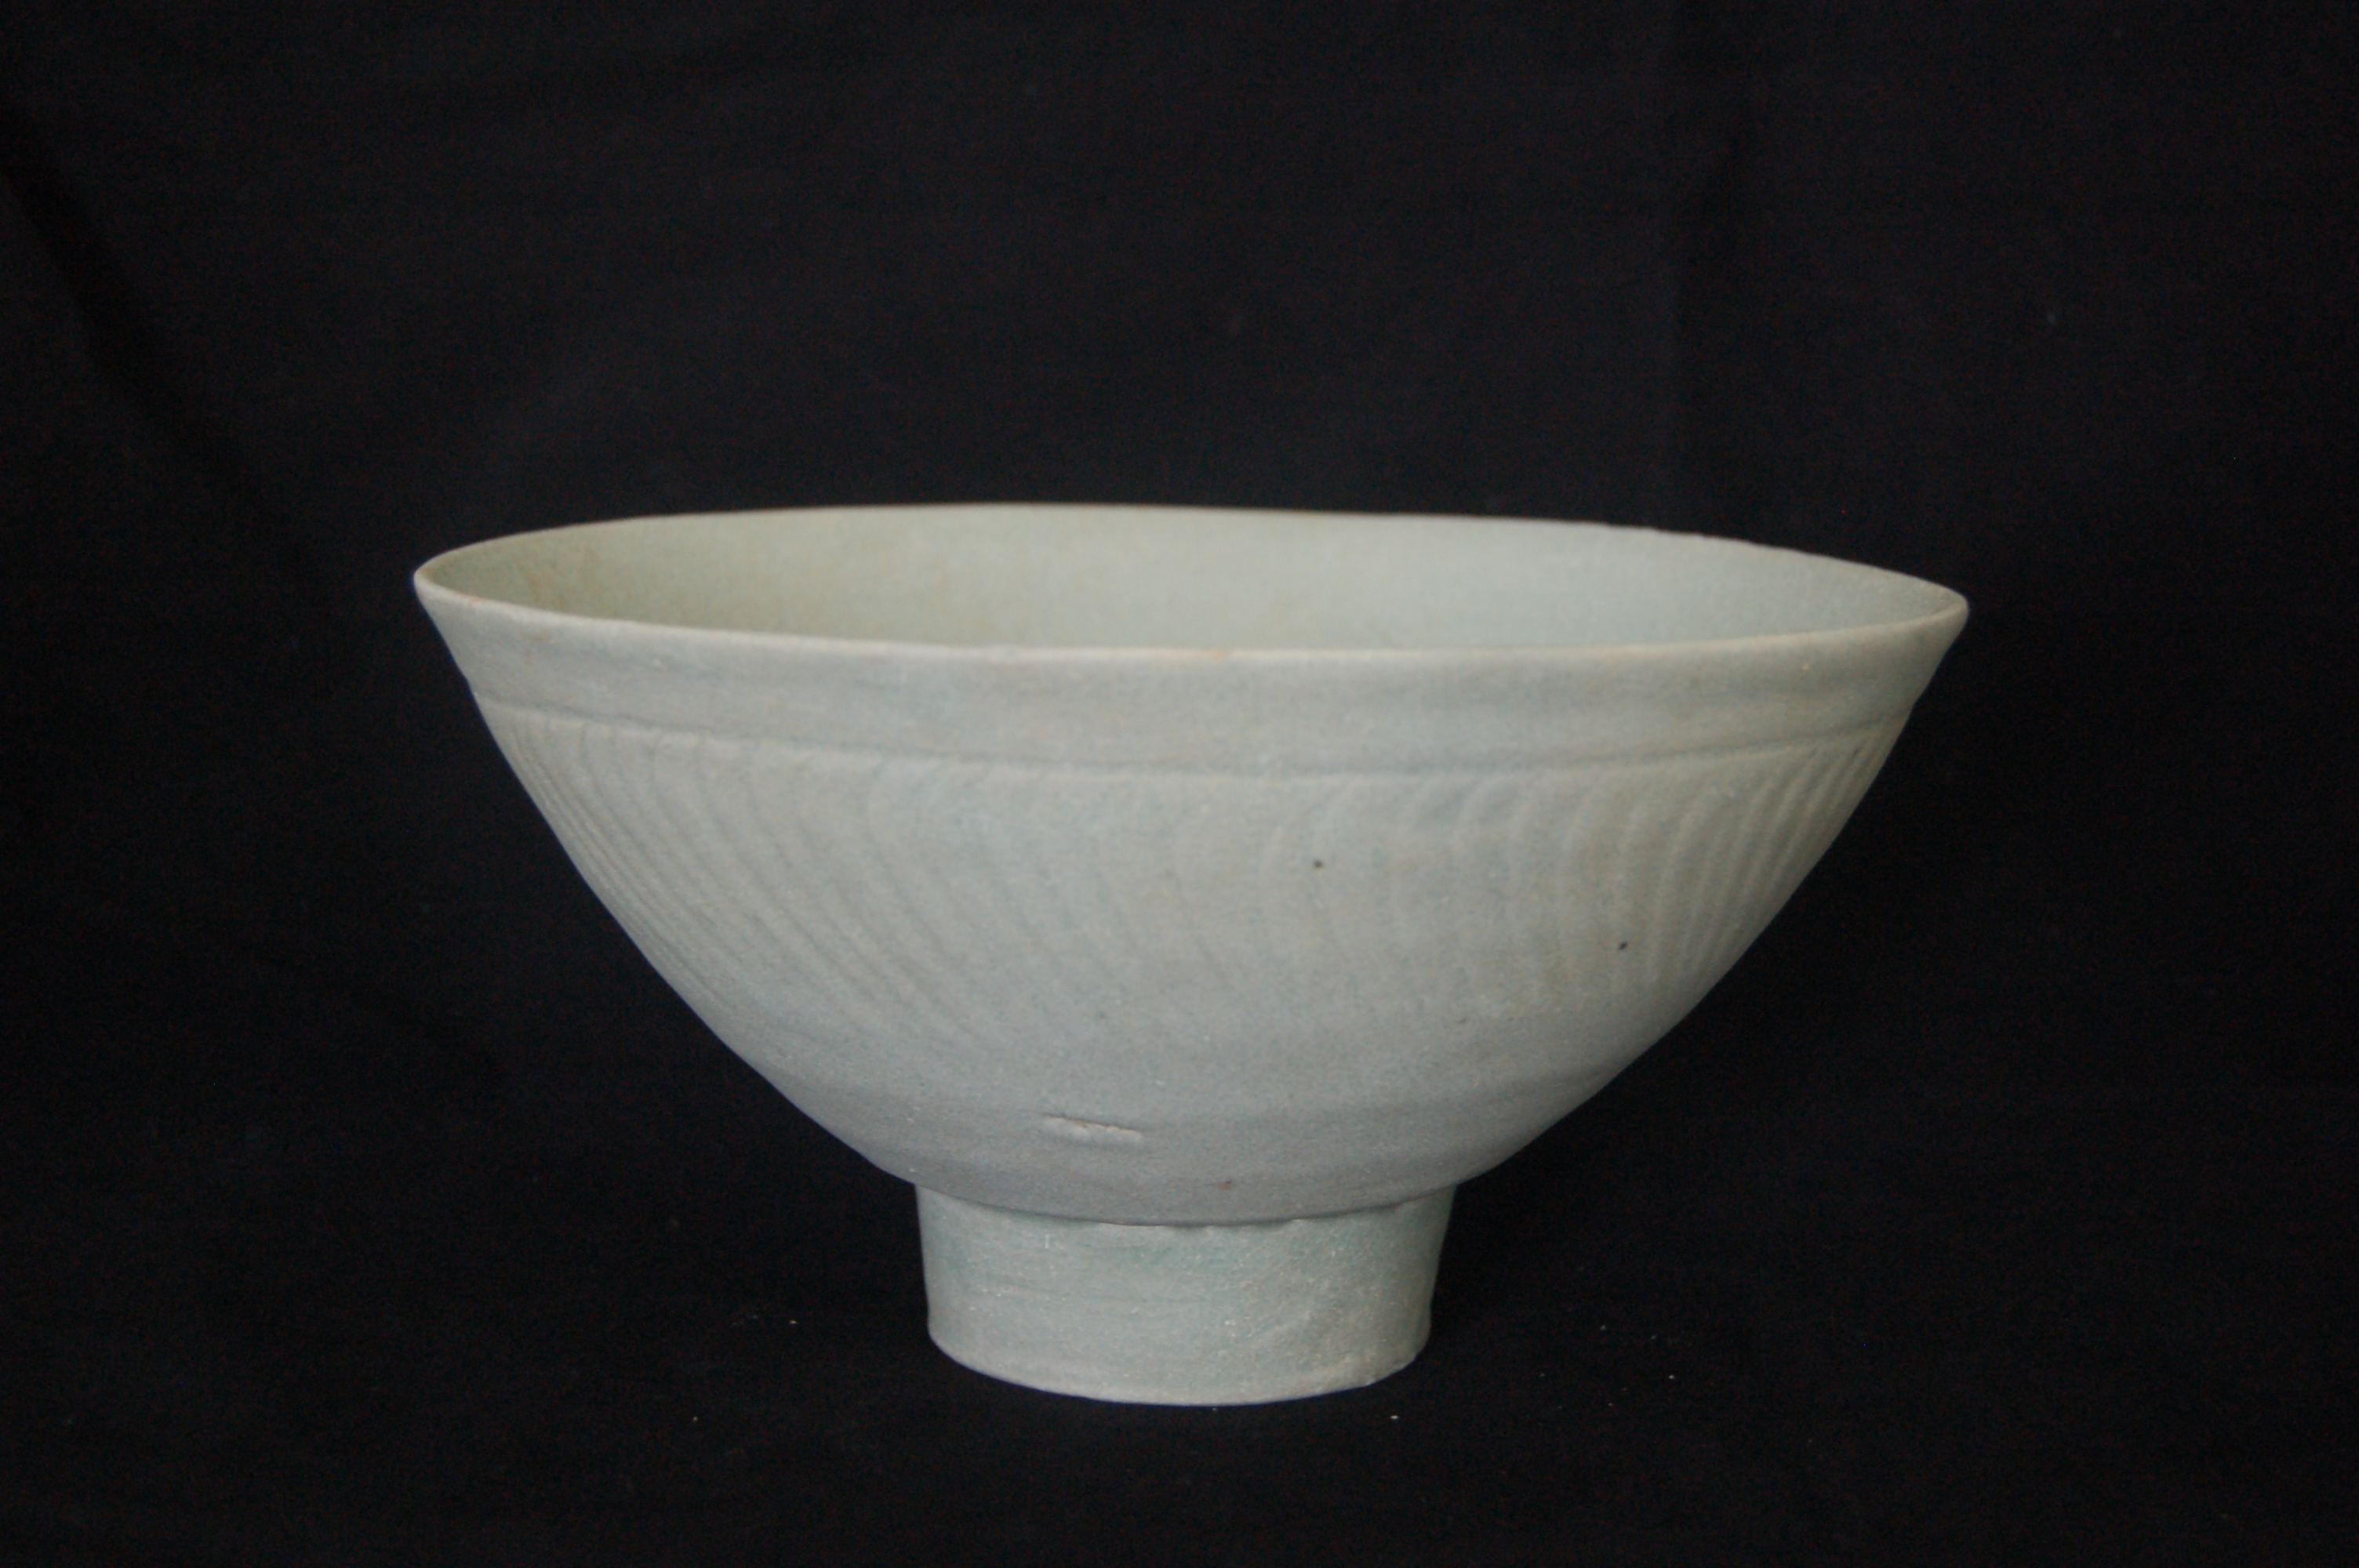 Medium bowl with a slightly everted rim, gently rounded wall with incised striations, lightly incised wavy or floral decorations on the interior, and a high carved foot-ring. Diameter 19.5 cm, height 10 cm.